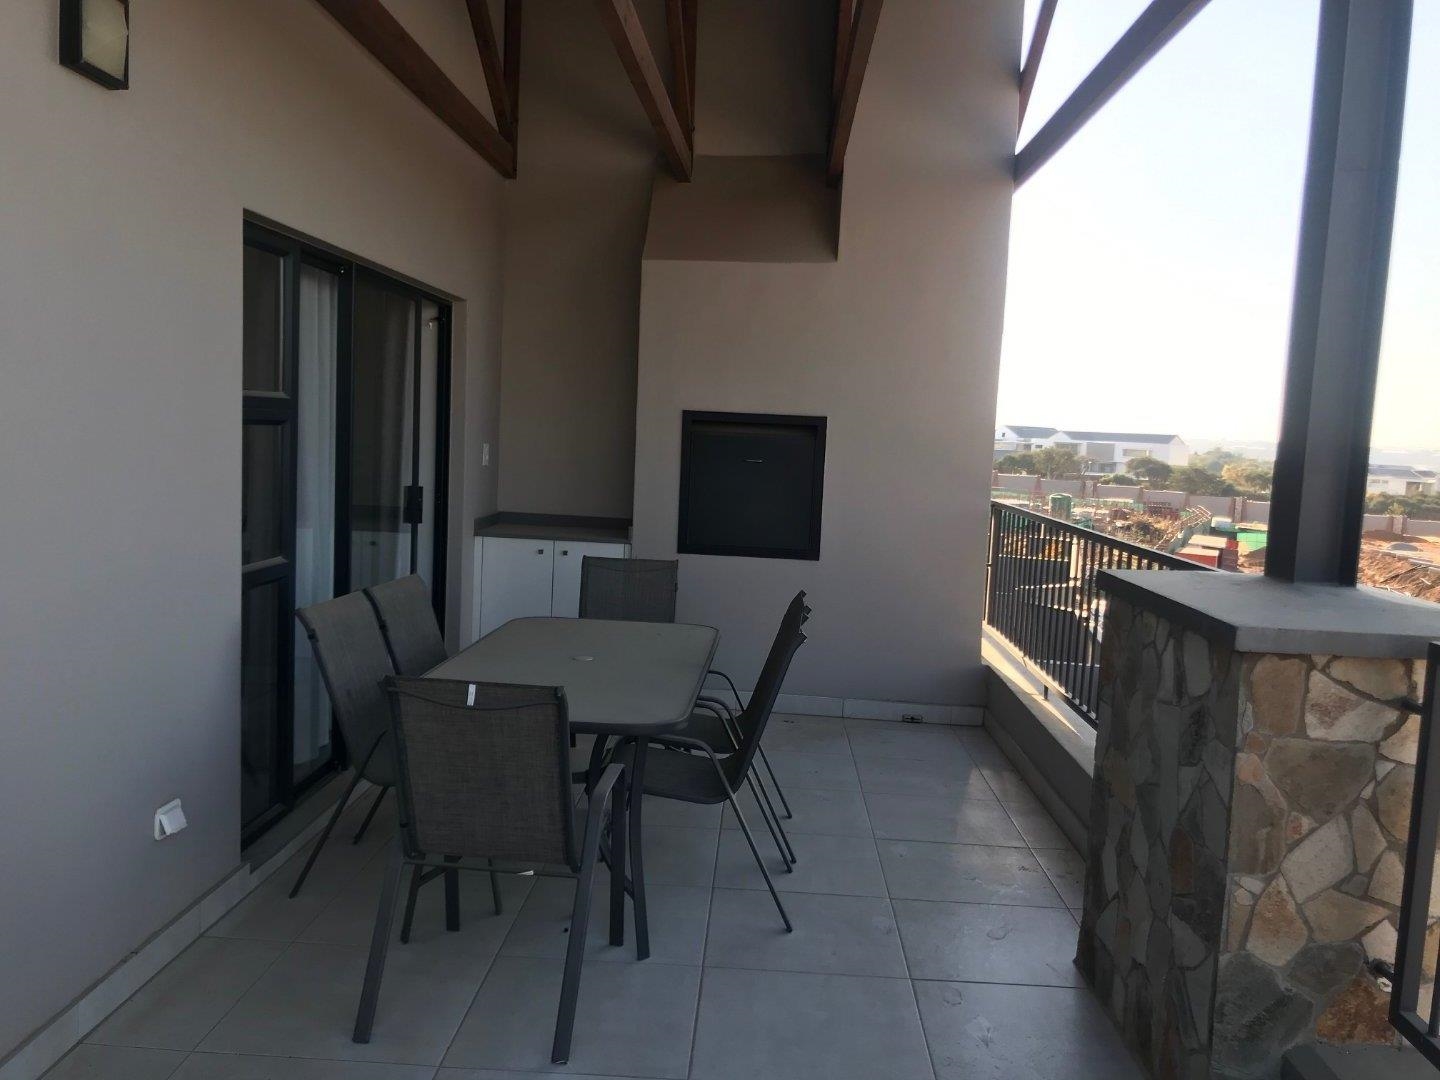 2 Bedroom Apartment In Waterfall Polo Estate Midrand Rental Monthly For R 25 000 1857943